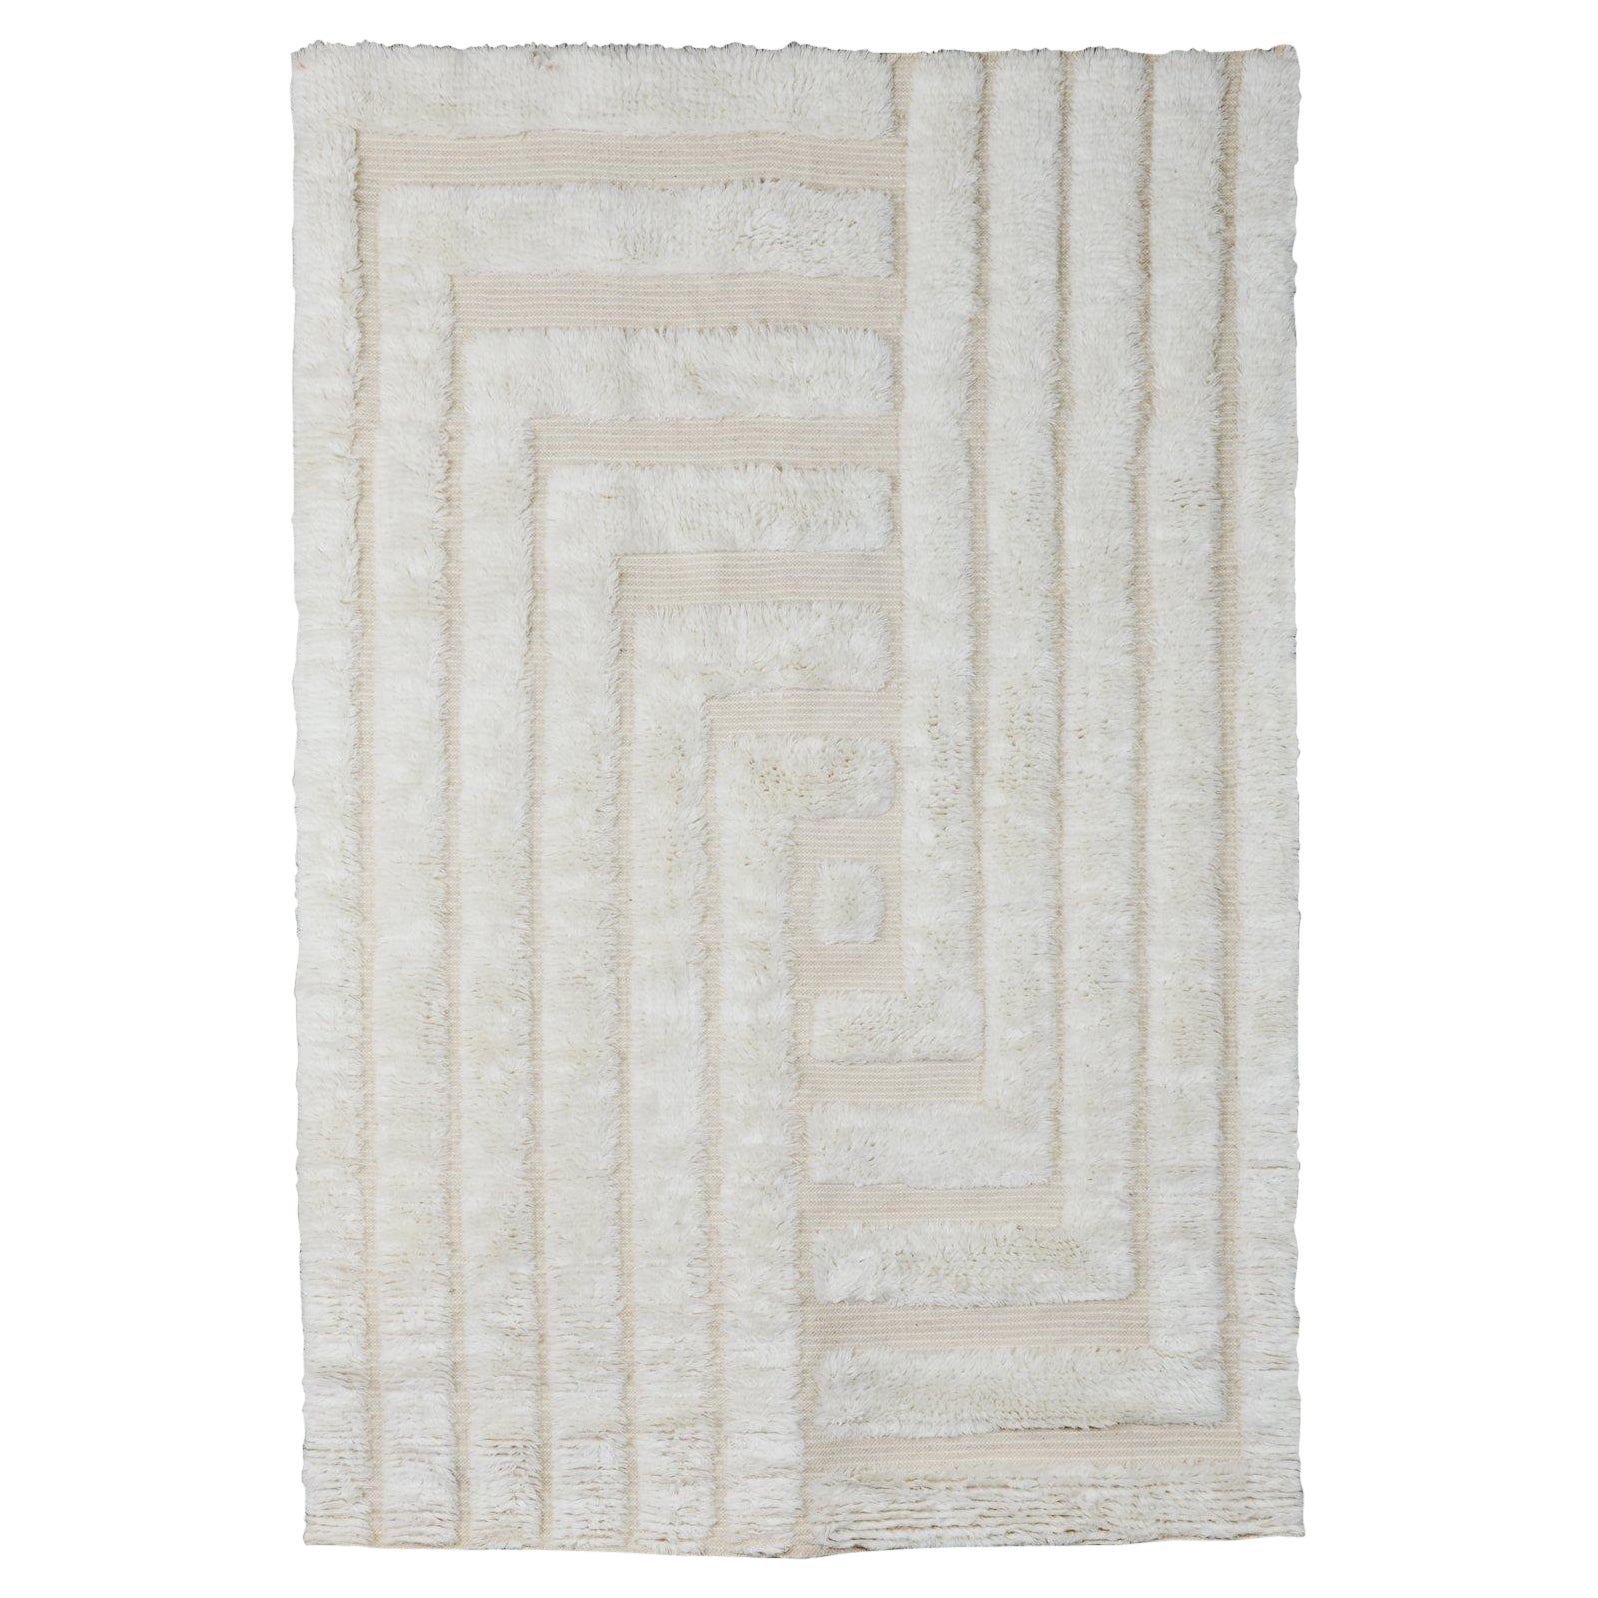 Handwoven Shaggy Labyrinth Wool Rug White Large For Sale